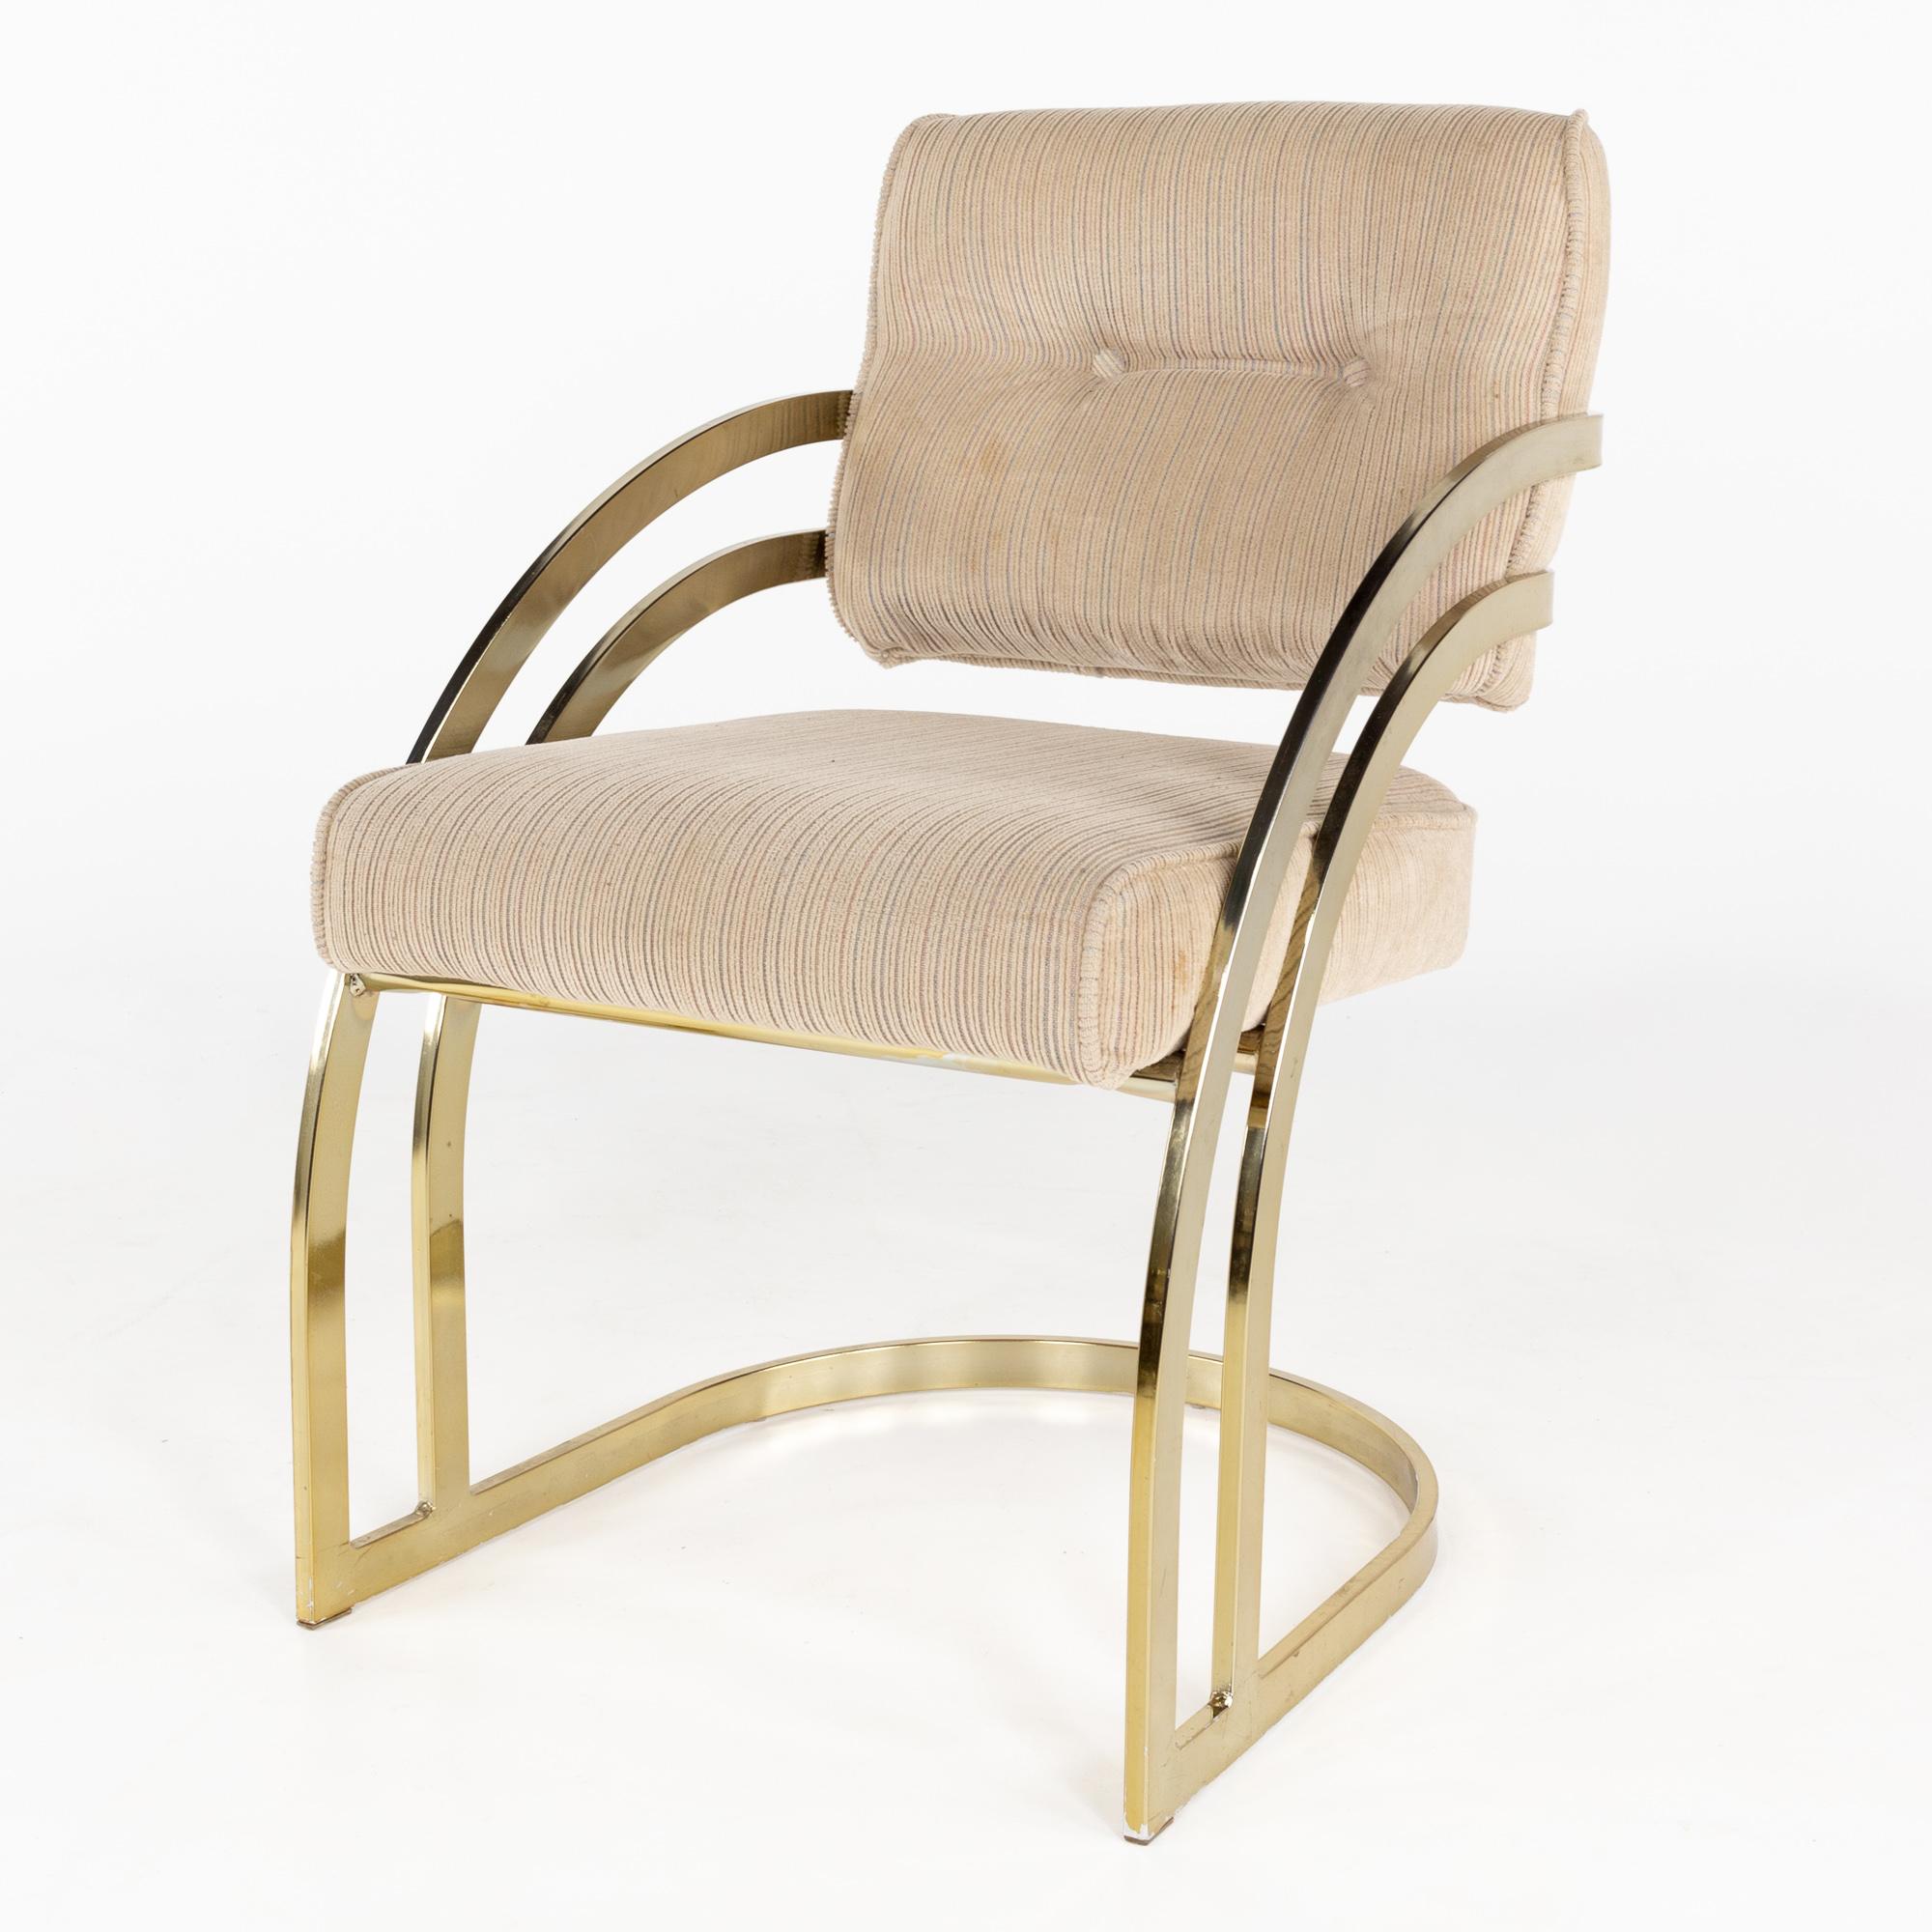 Late 20th Century Milo Baughan Style Mid Century Brass Cantilever Dining Chairs, Set of 6